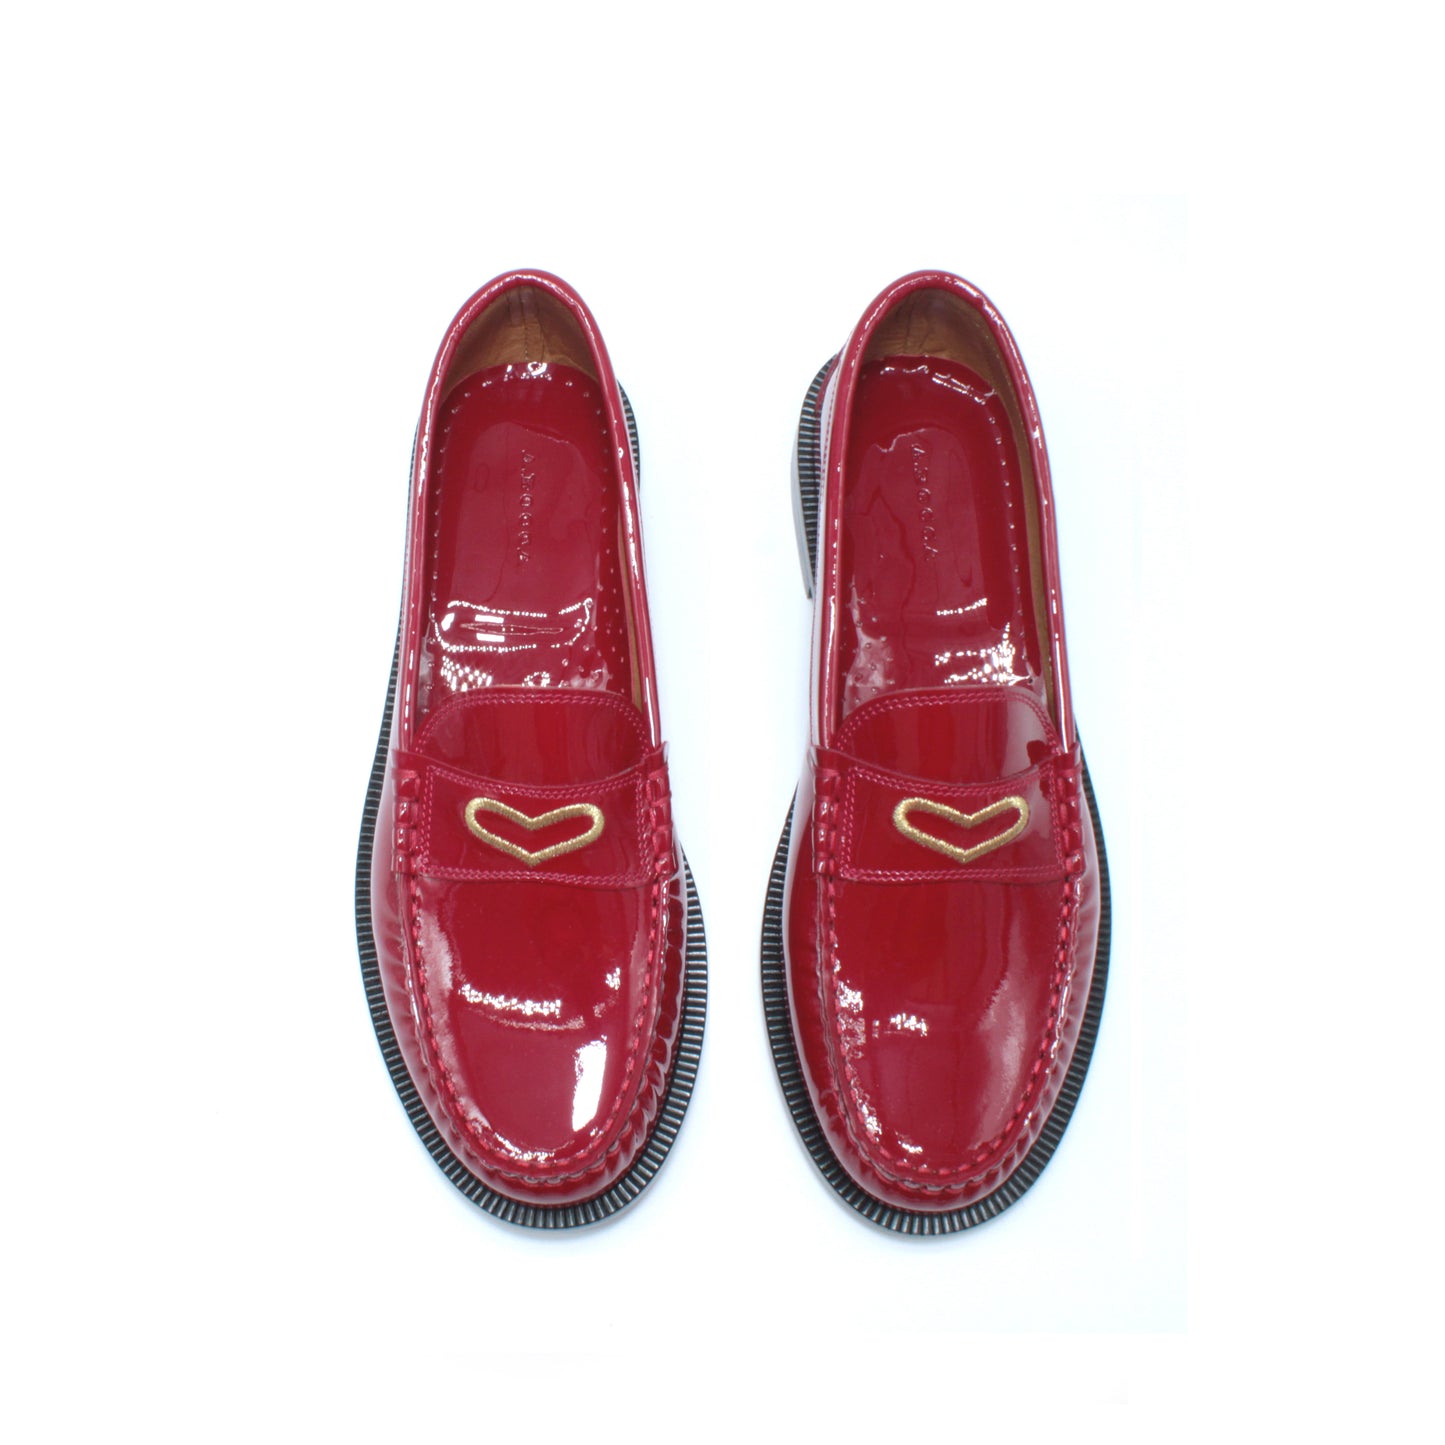 Merlot-colored patent moccasin